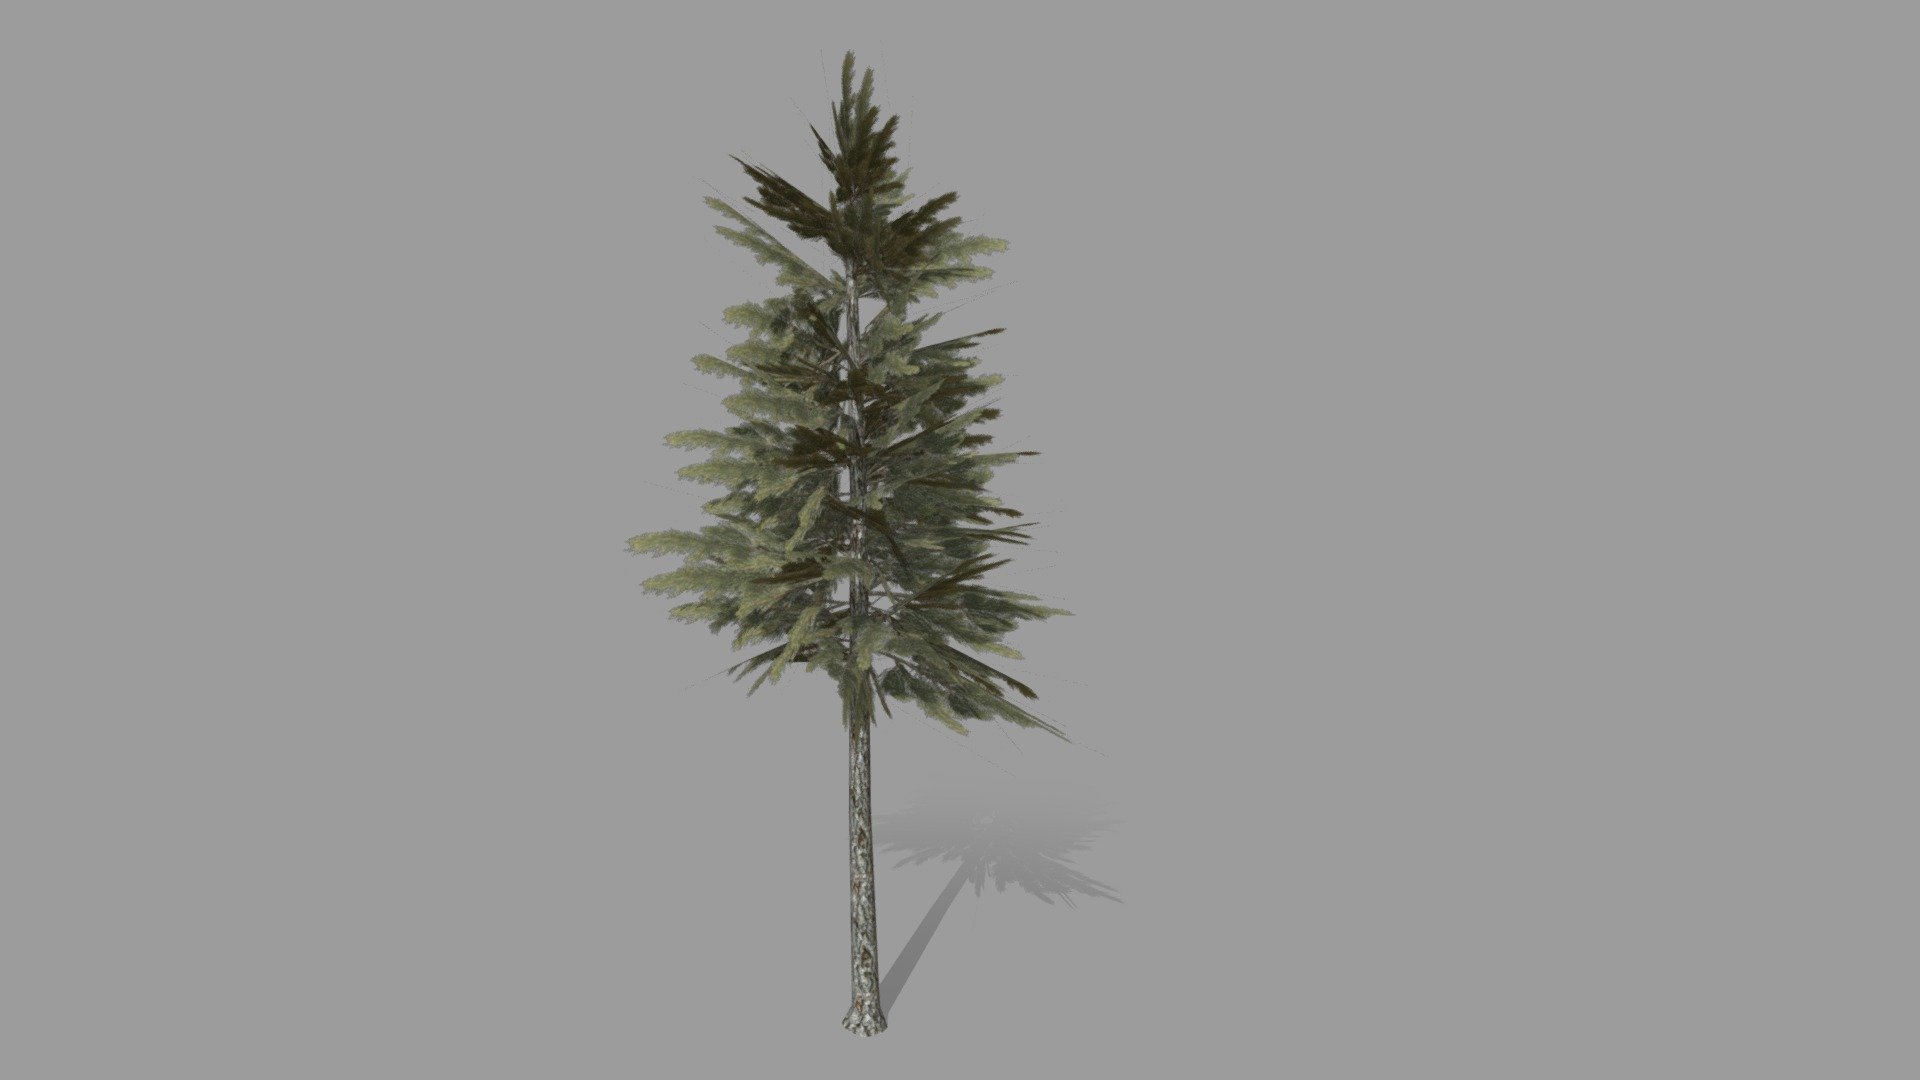 The model consists of 282 triangles. The material for the leaves and the trunk of the tree is one. There is a base color texture and an opacity map. For optimization you can use a base color texture as an opacity map if your software allows it. Textures are at 1024x1024, if you compress them to 256x256 the model will still look good. You can use this model for your games or other projects 3d model